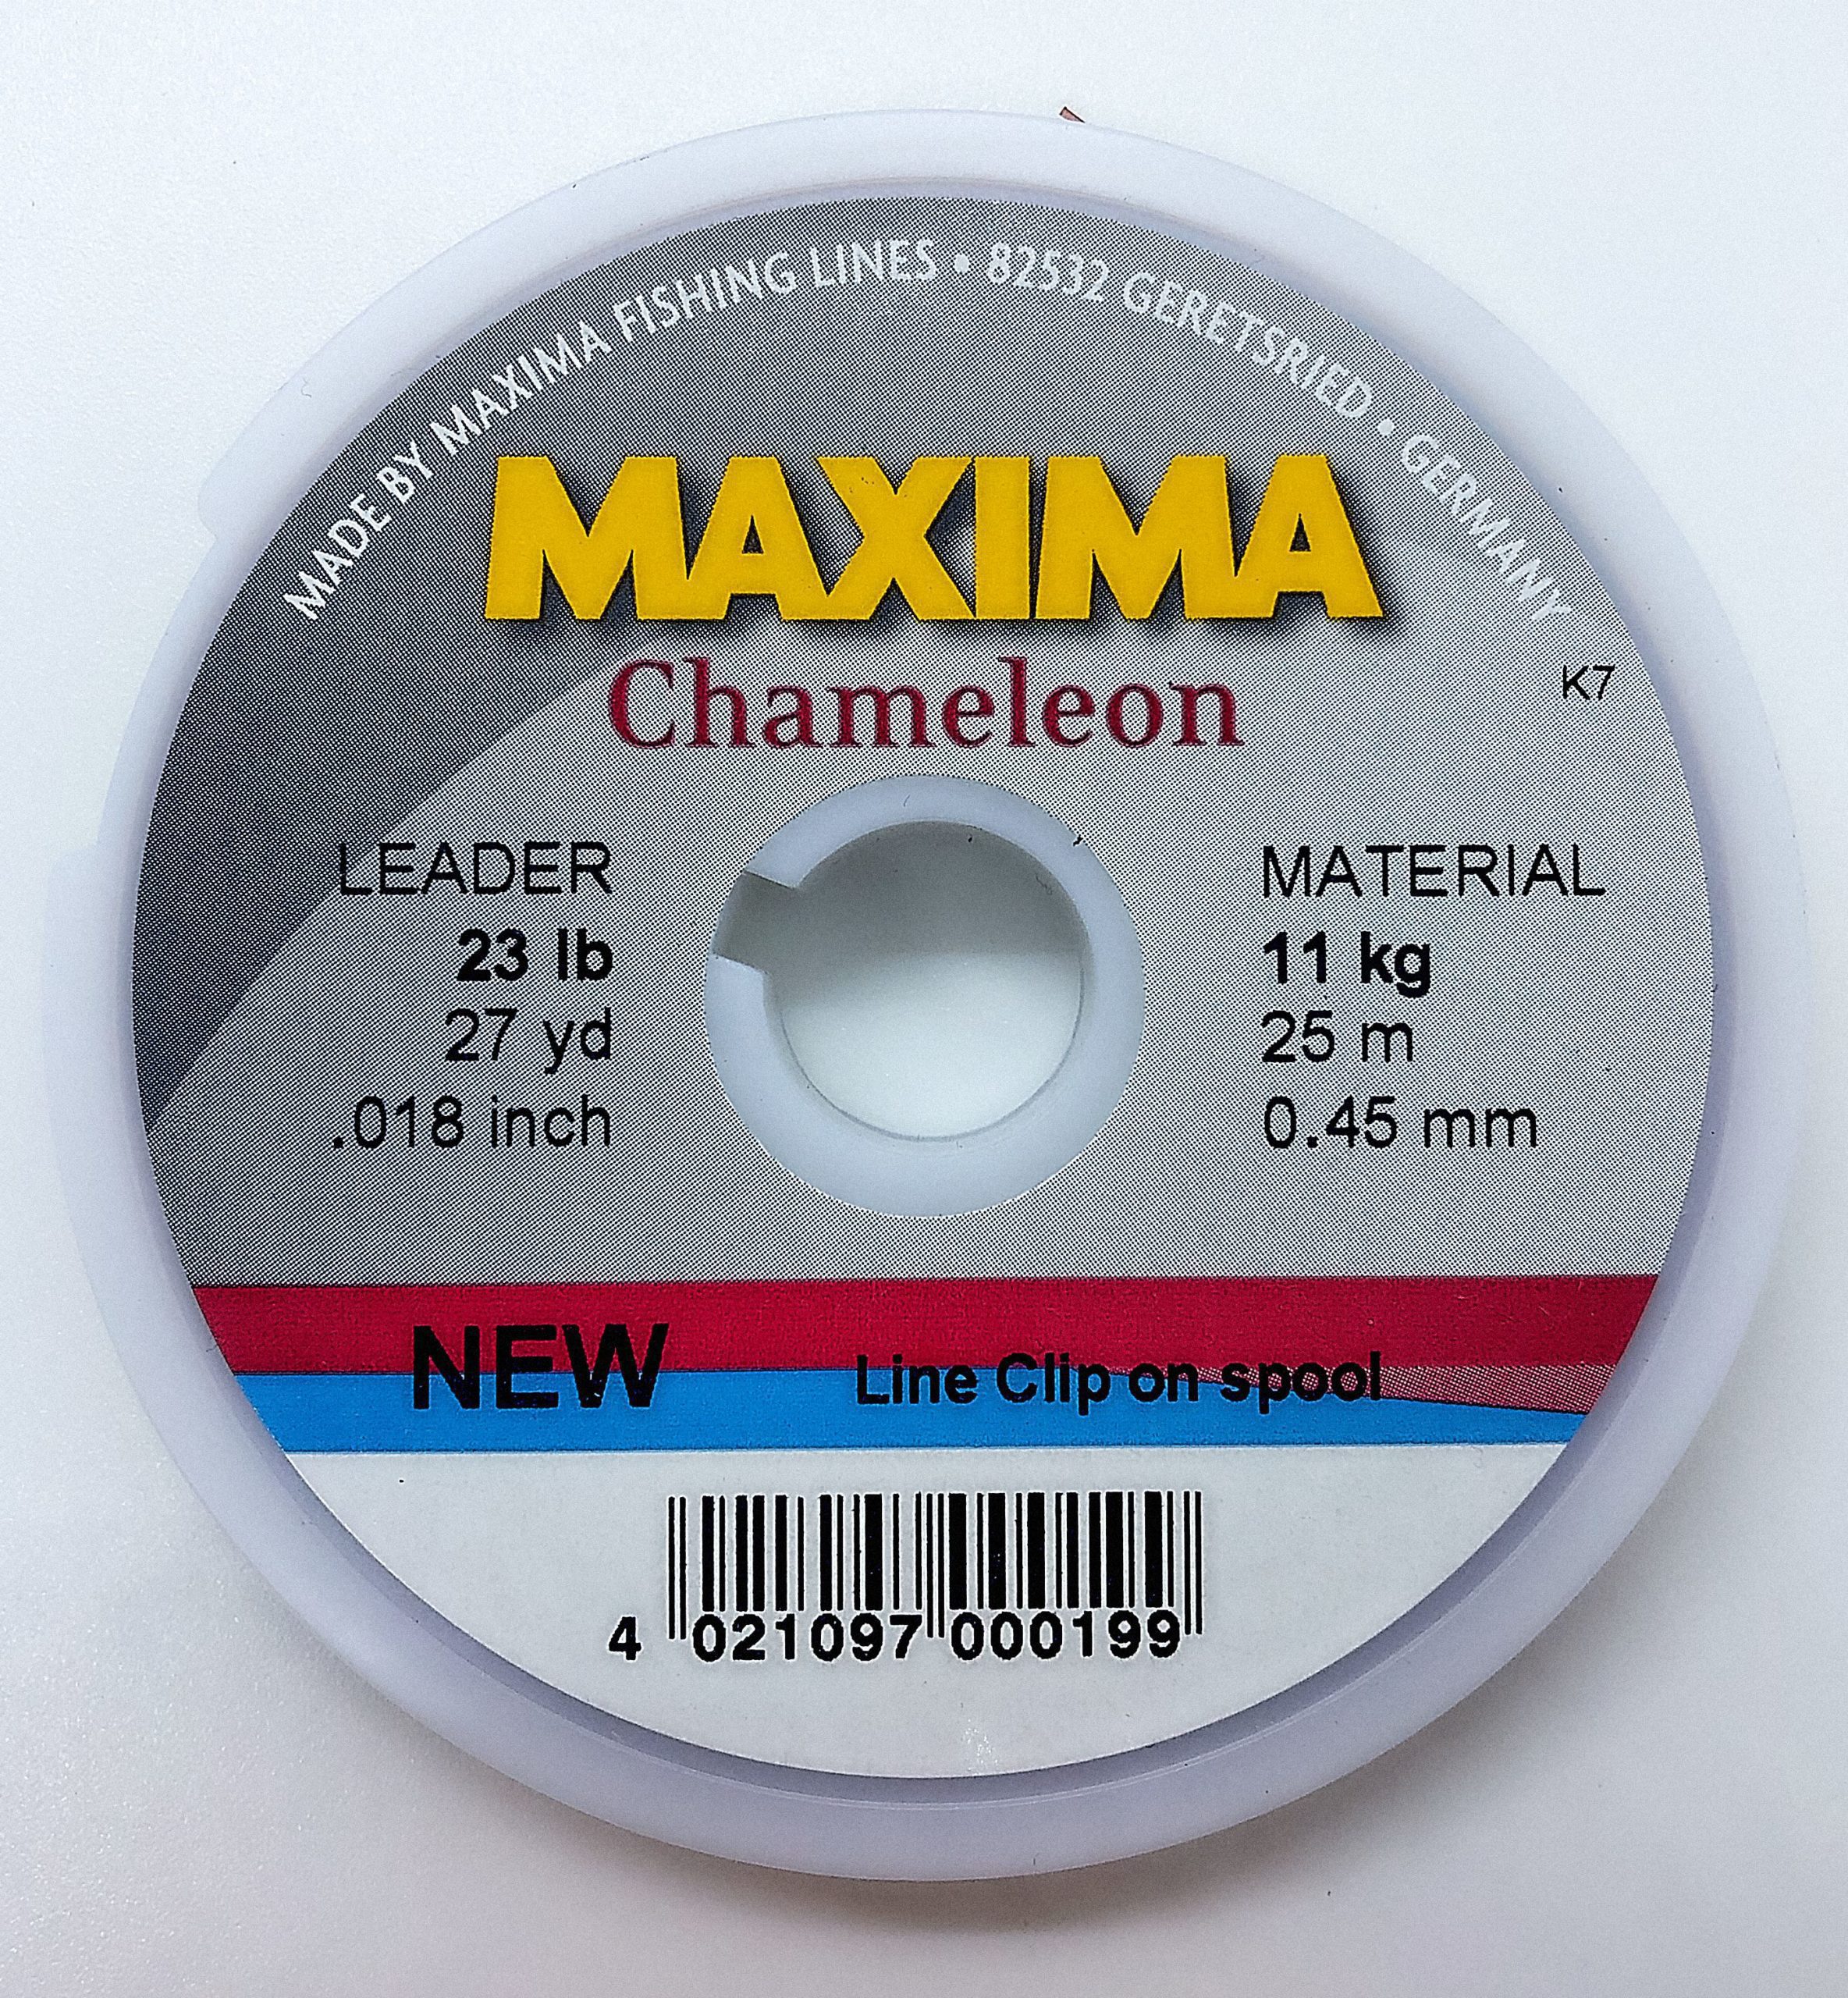 All Weights Maxima Chameleon High Stealth Fly Fishing Line Leader Tippet Wheel 